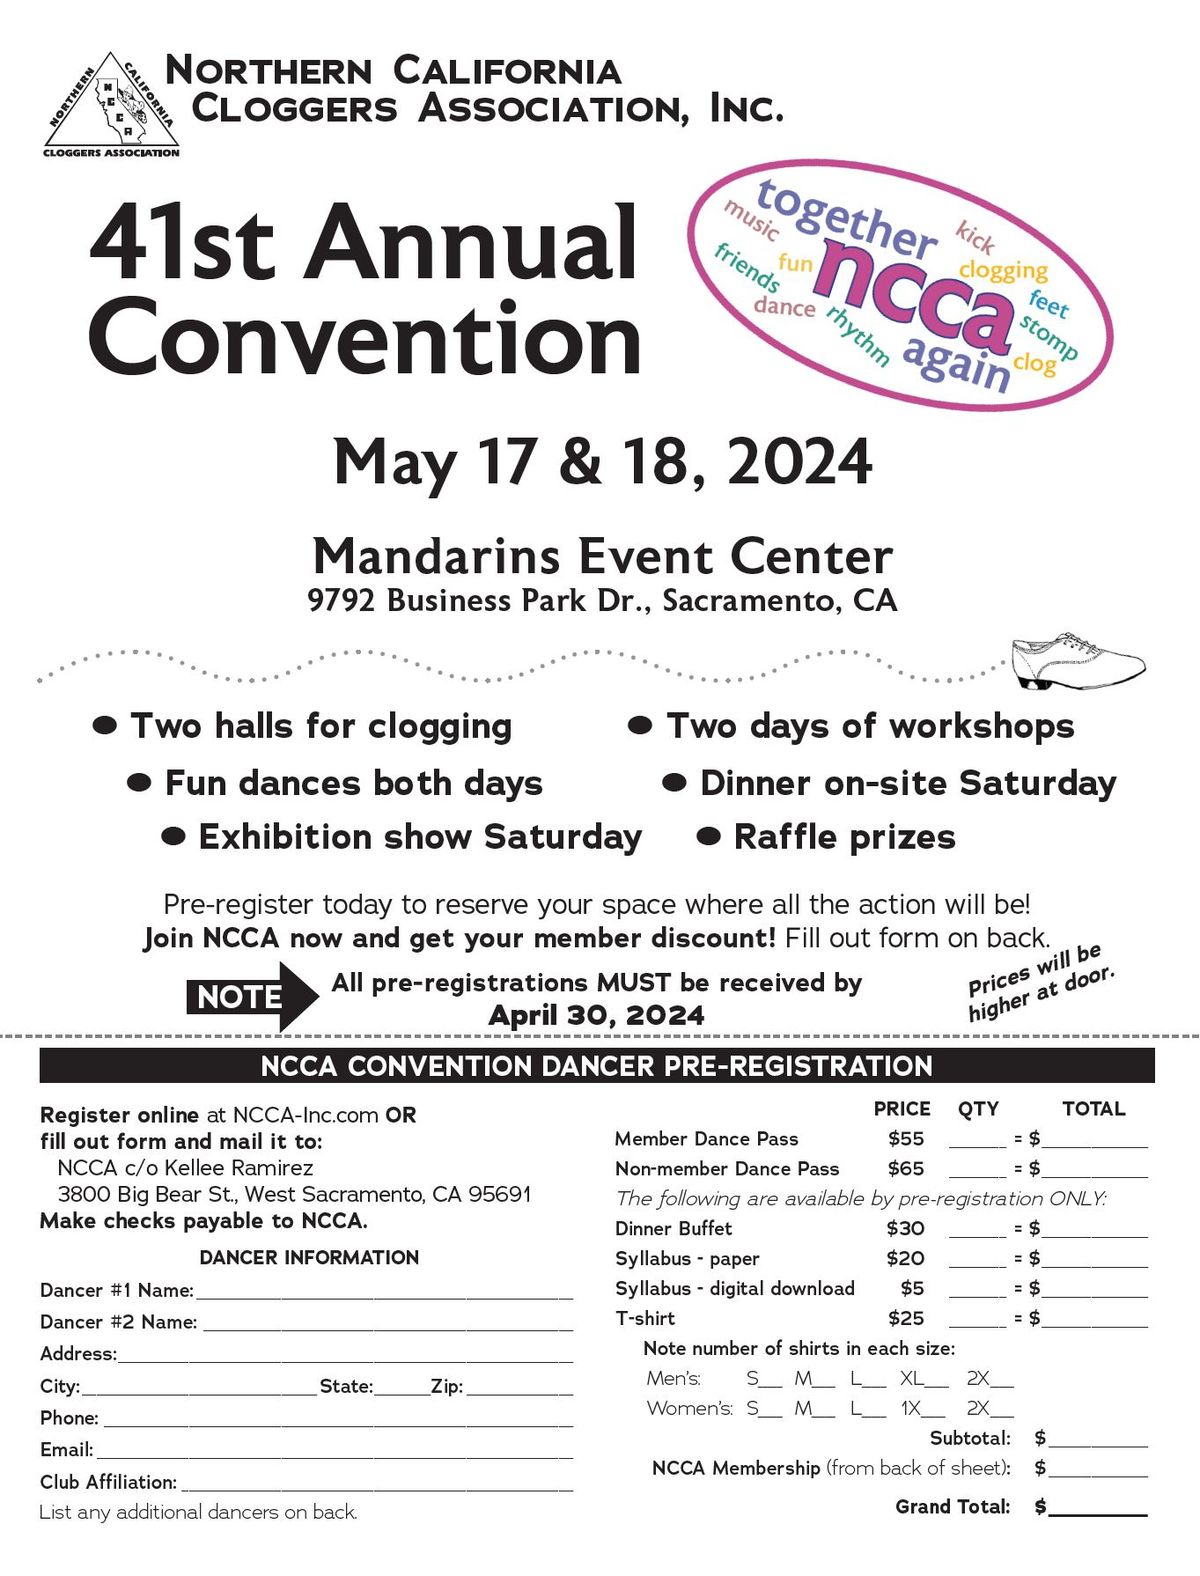 NCCA's 41st Annual Convention